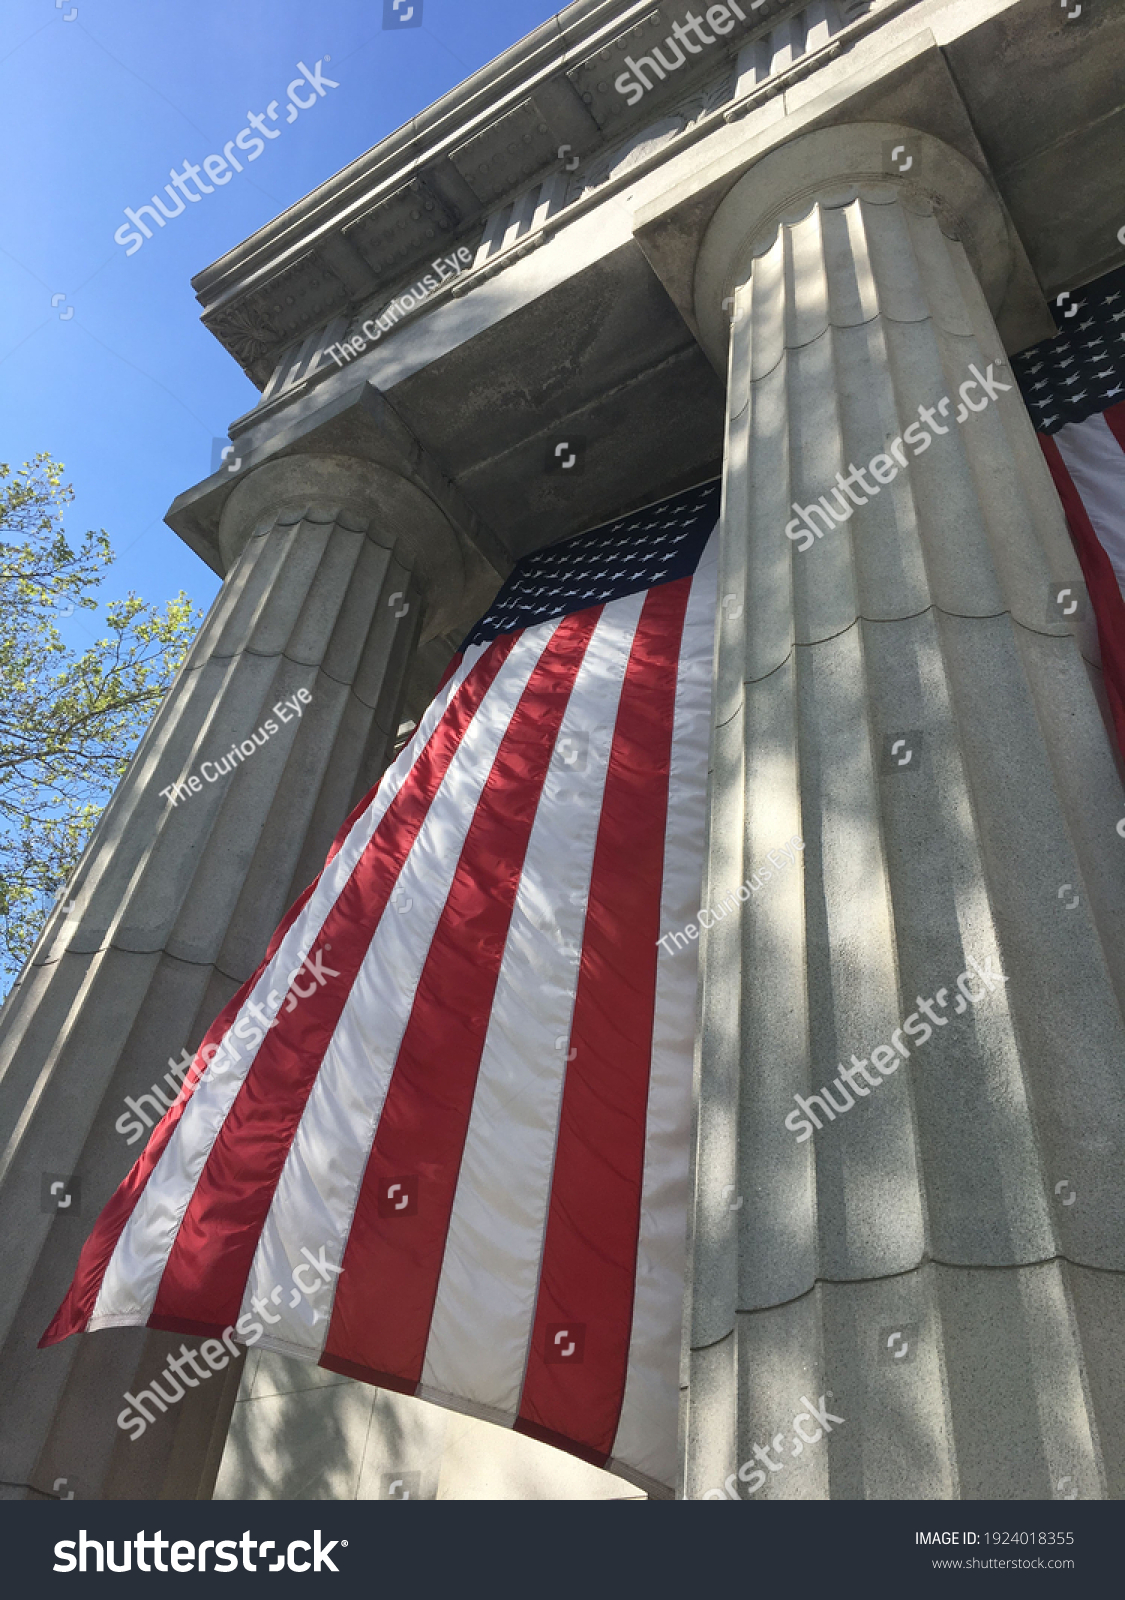 A large American flag hangs in front of General Grant National Memorial aka Grant's Tomb in Morningside Heights, New York City, USA #1924018355